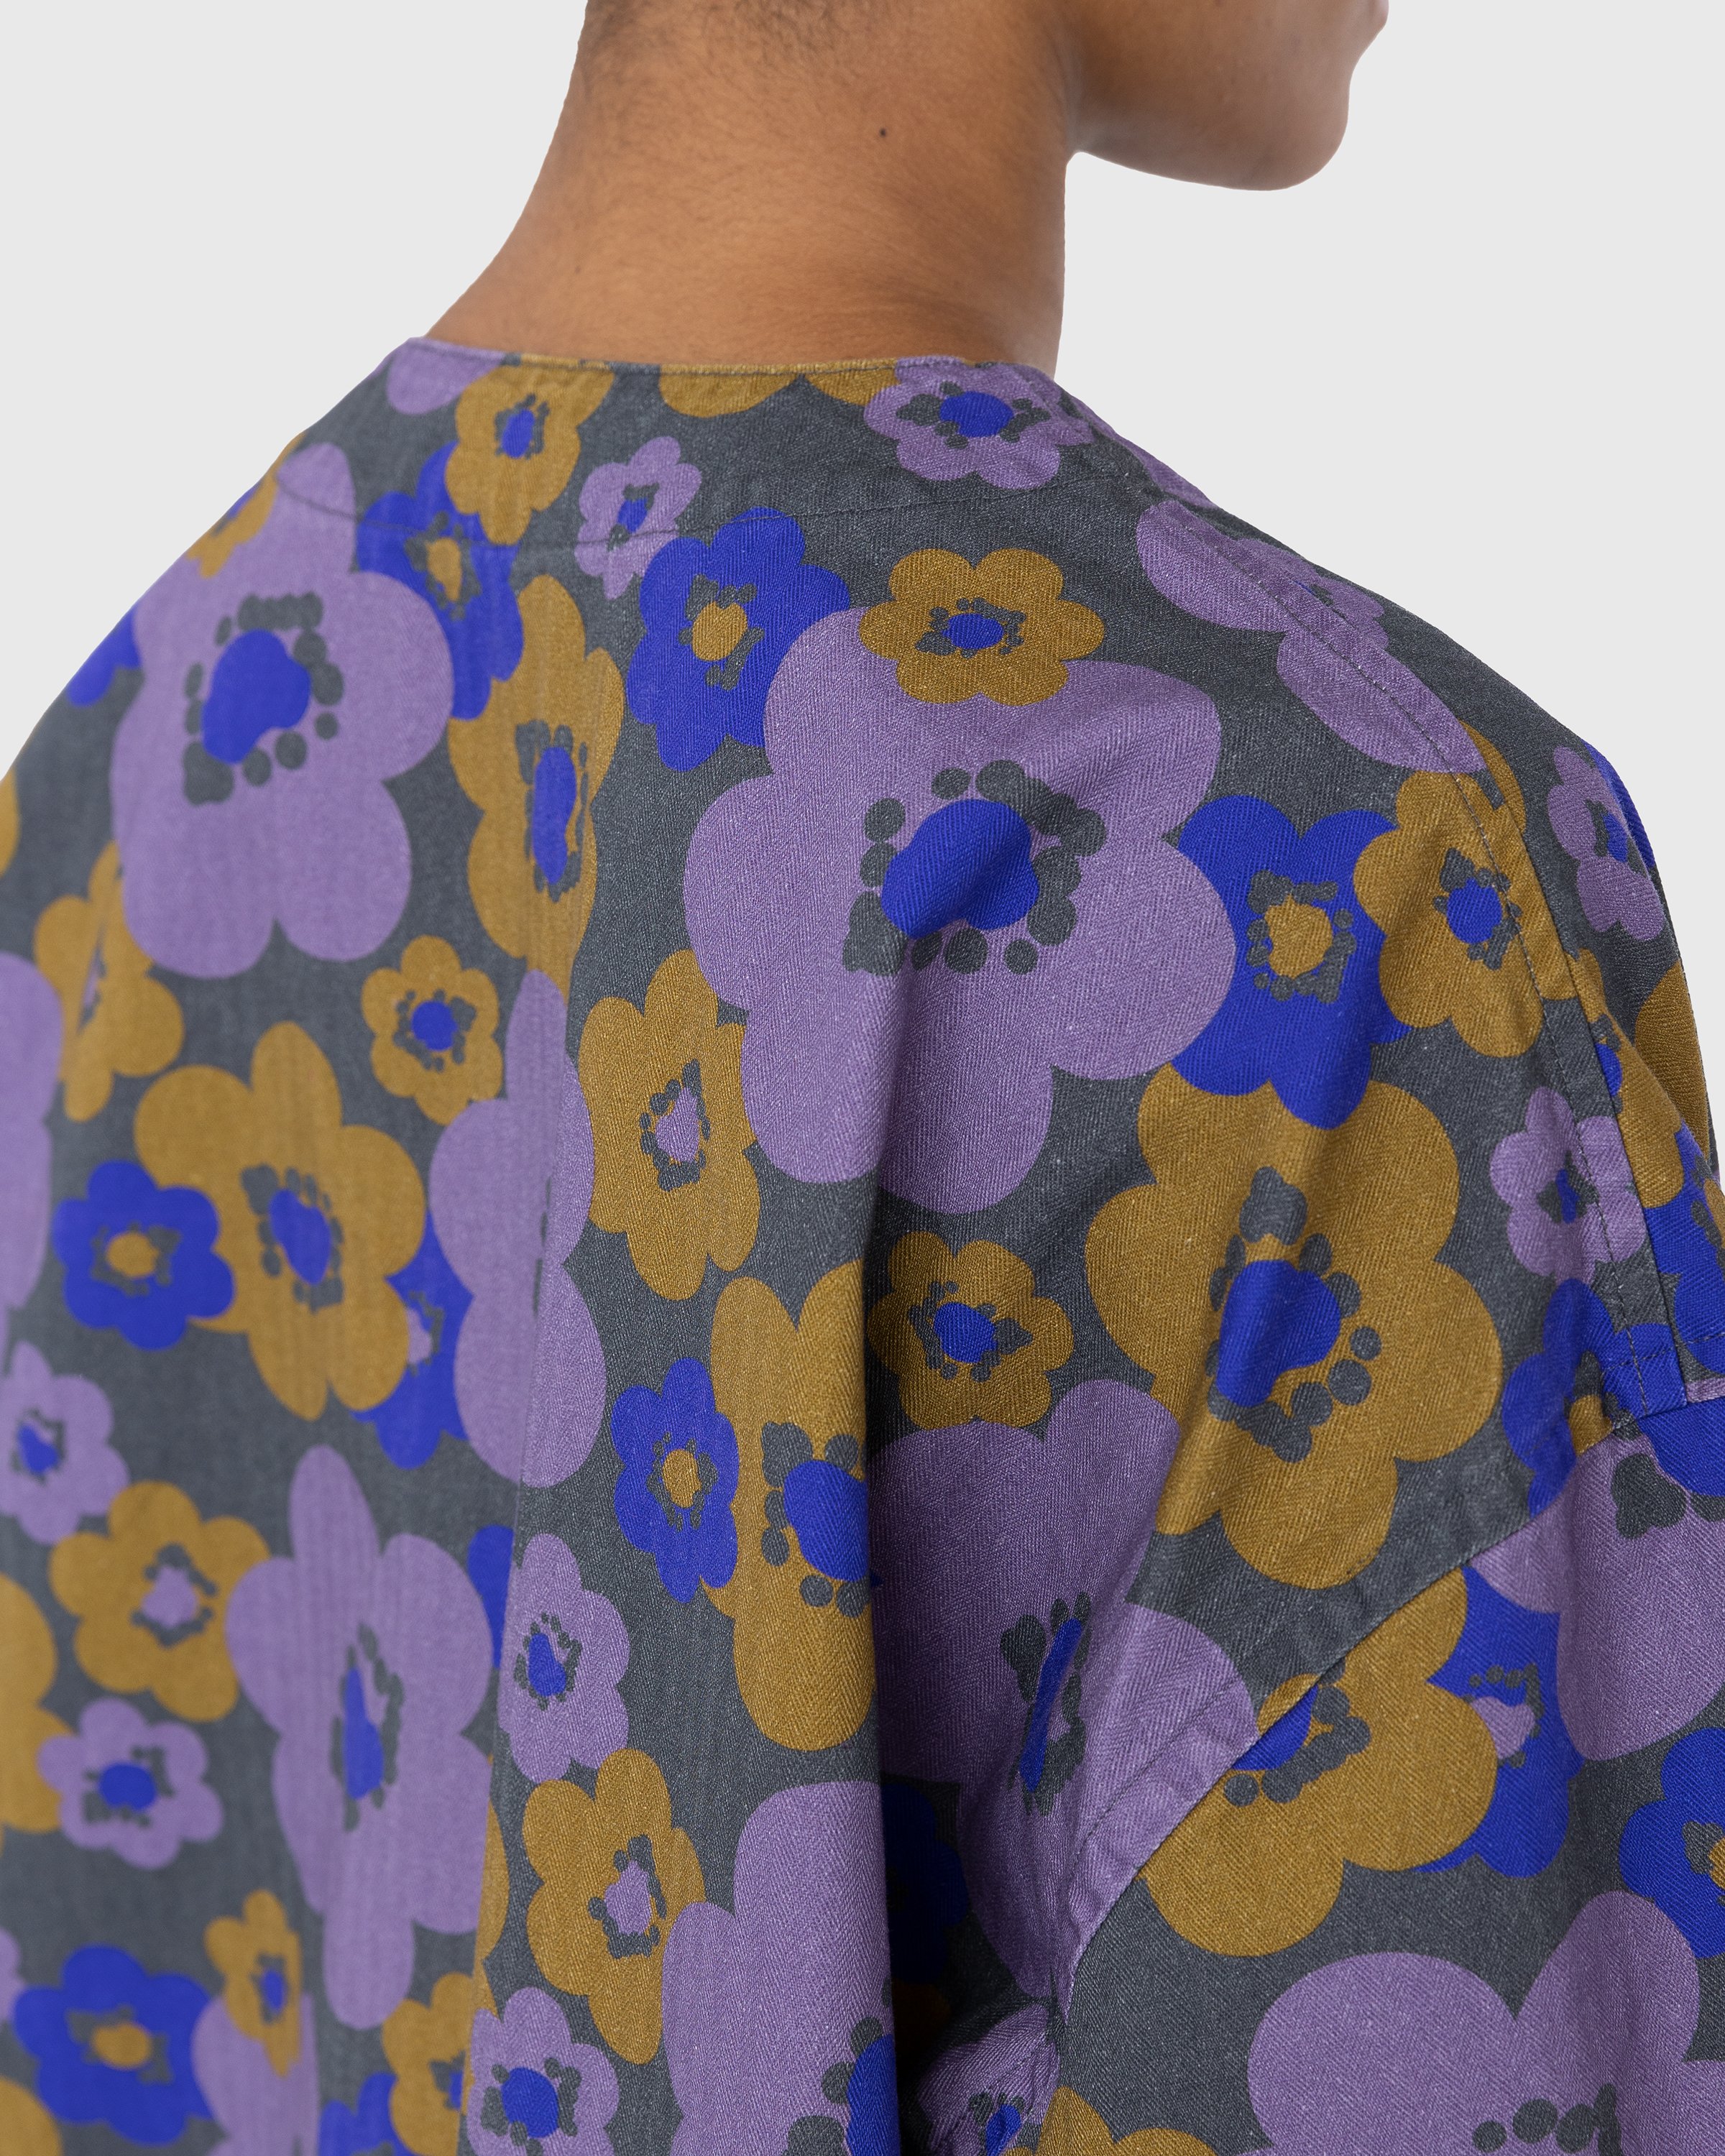 Acne Studios - Floral Short-Sleeve Button-Up Purple/Brown - Clothing - Multi - Image 6